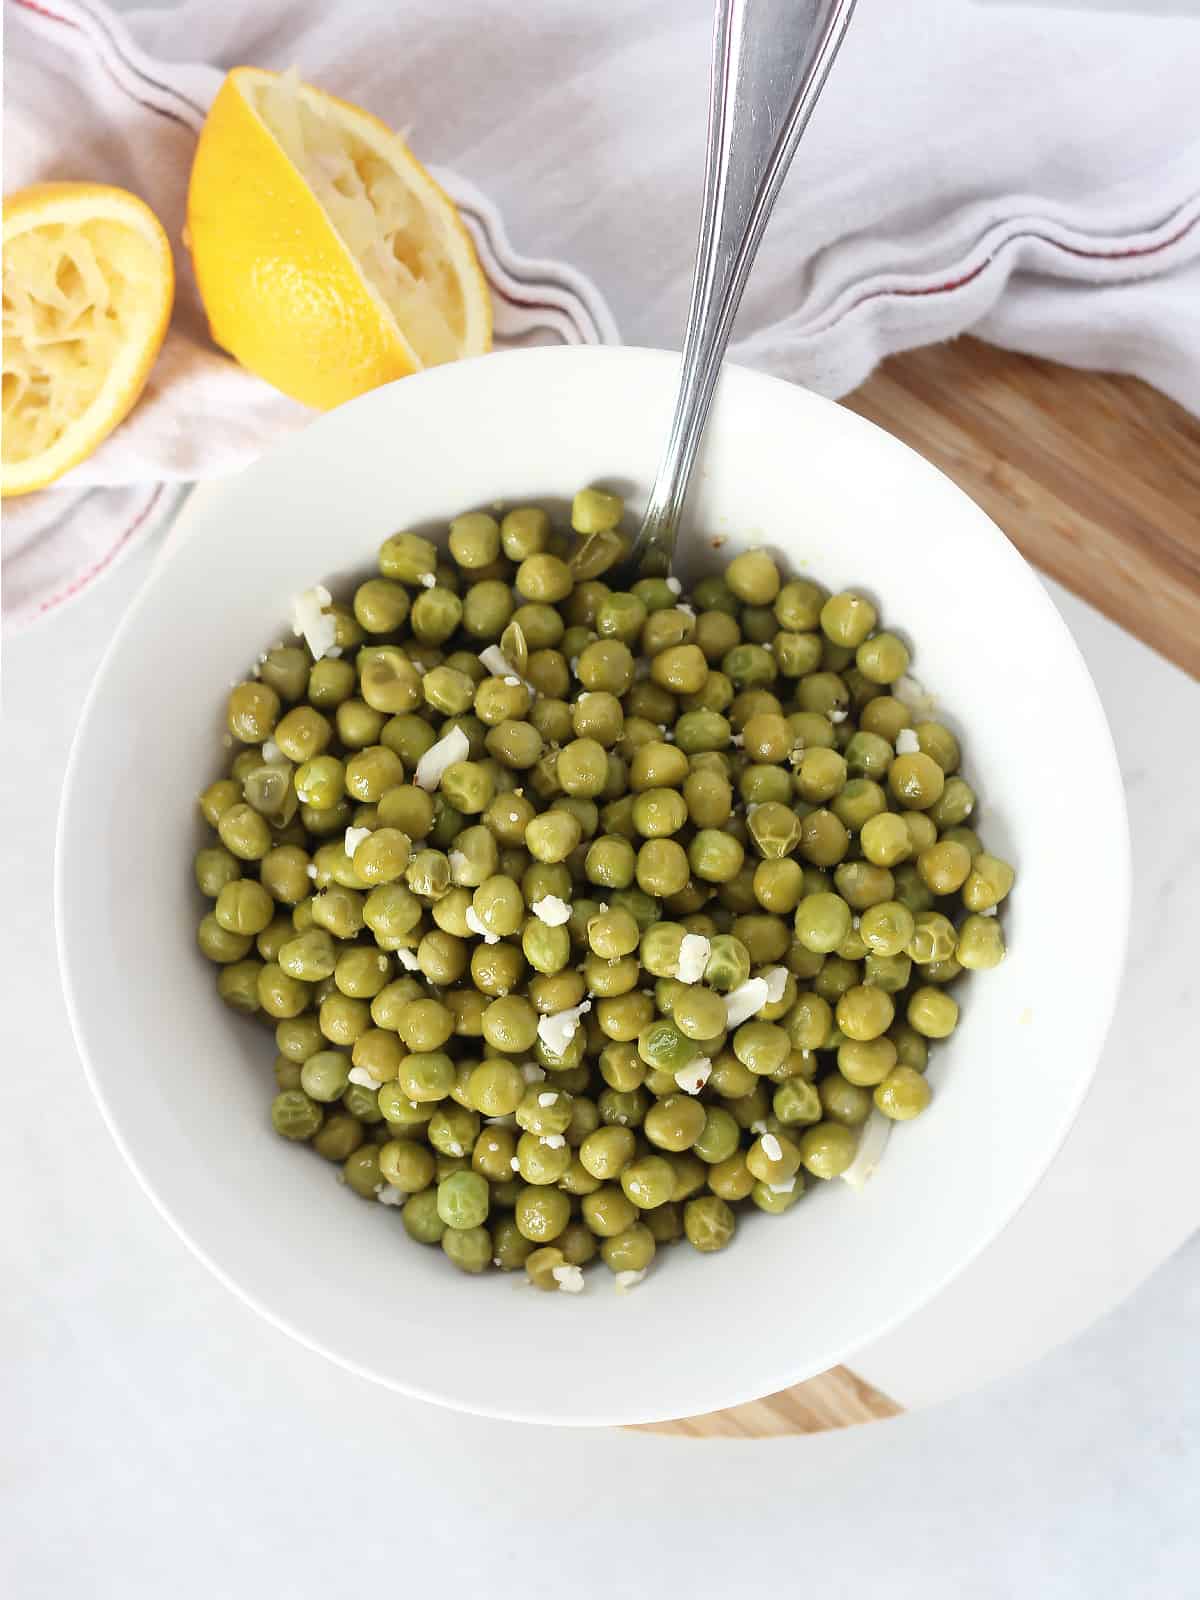 Green peas in a bowl with a spoon, next to squeezed lemon halves.